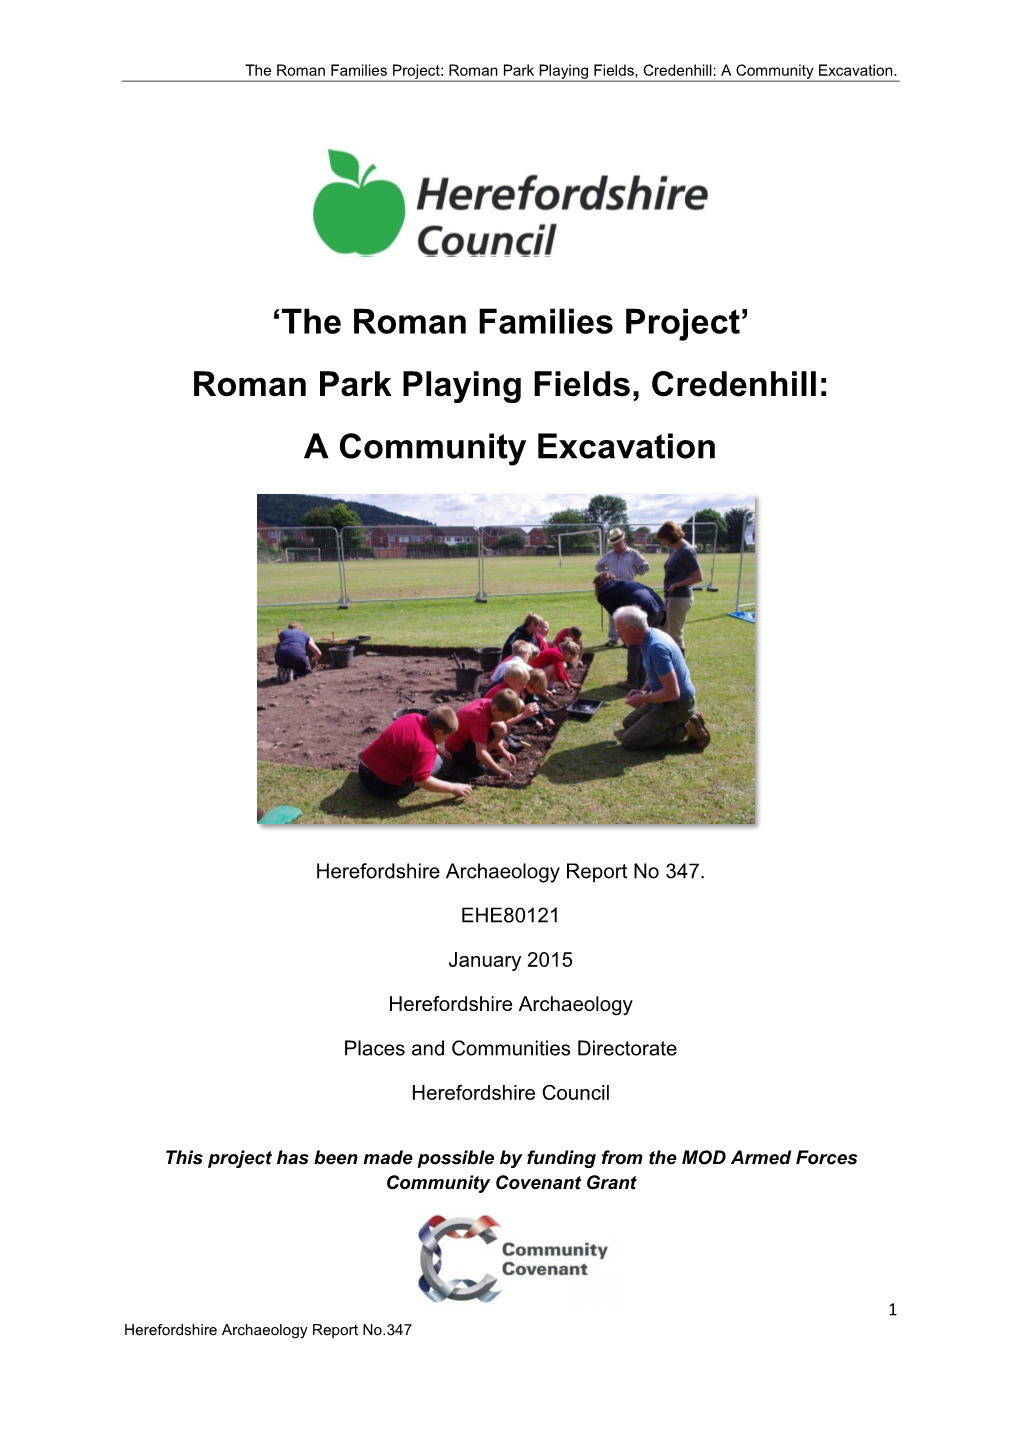 The Roman Families Project: Roman Park Playing Fields, Credenhill: a Community Excavation